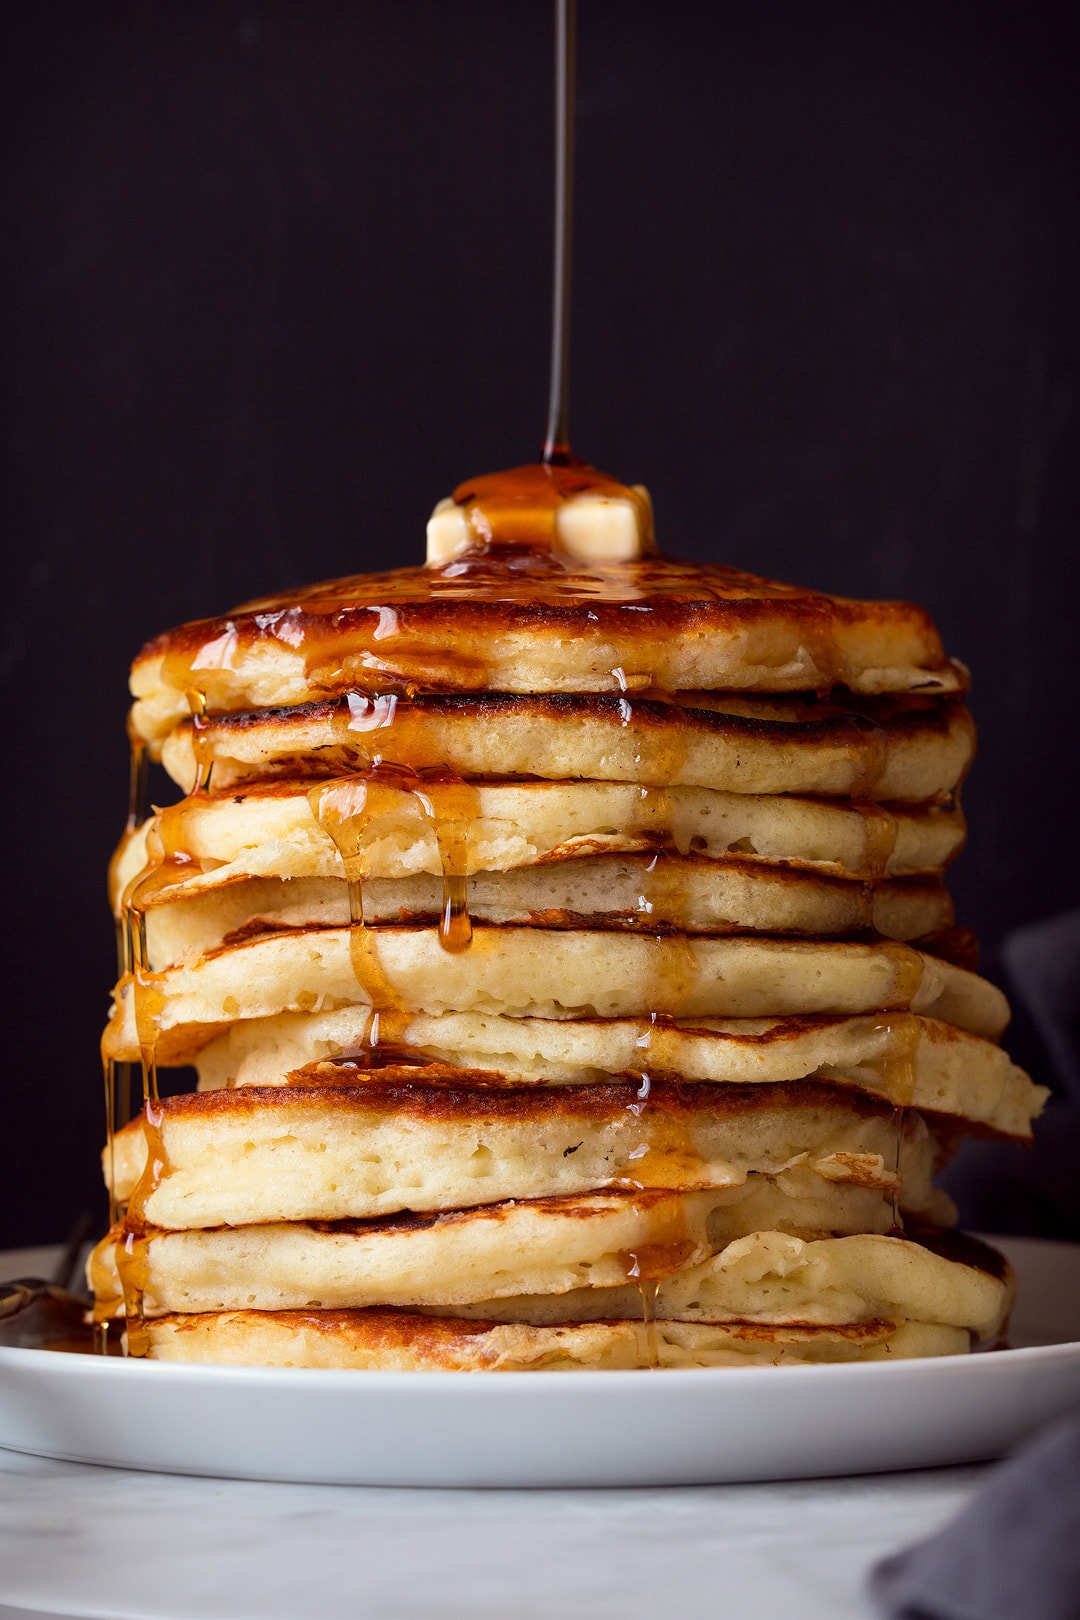 Maple syrup being poured over a tall stack of pancakes with a dab of butter on top. Pancakes are sitting on a large white plate on a marble surface, background is black.